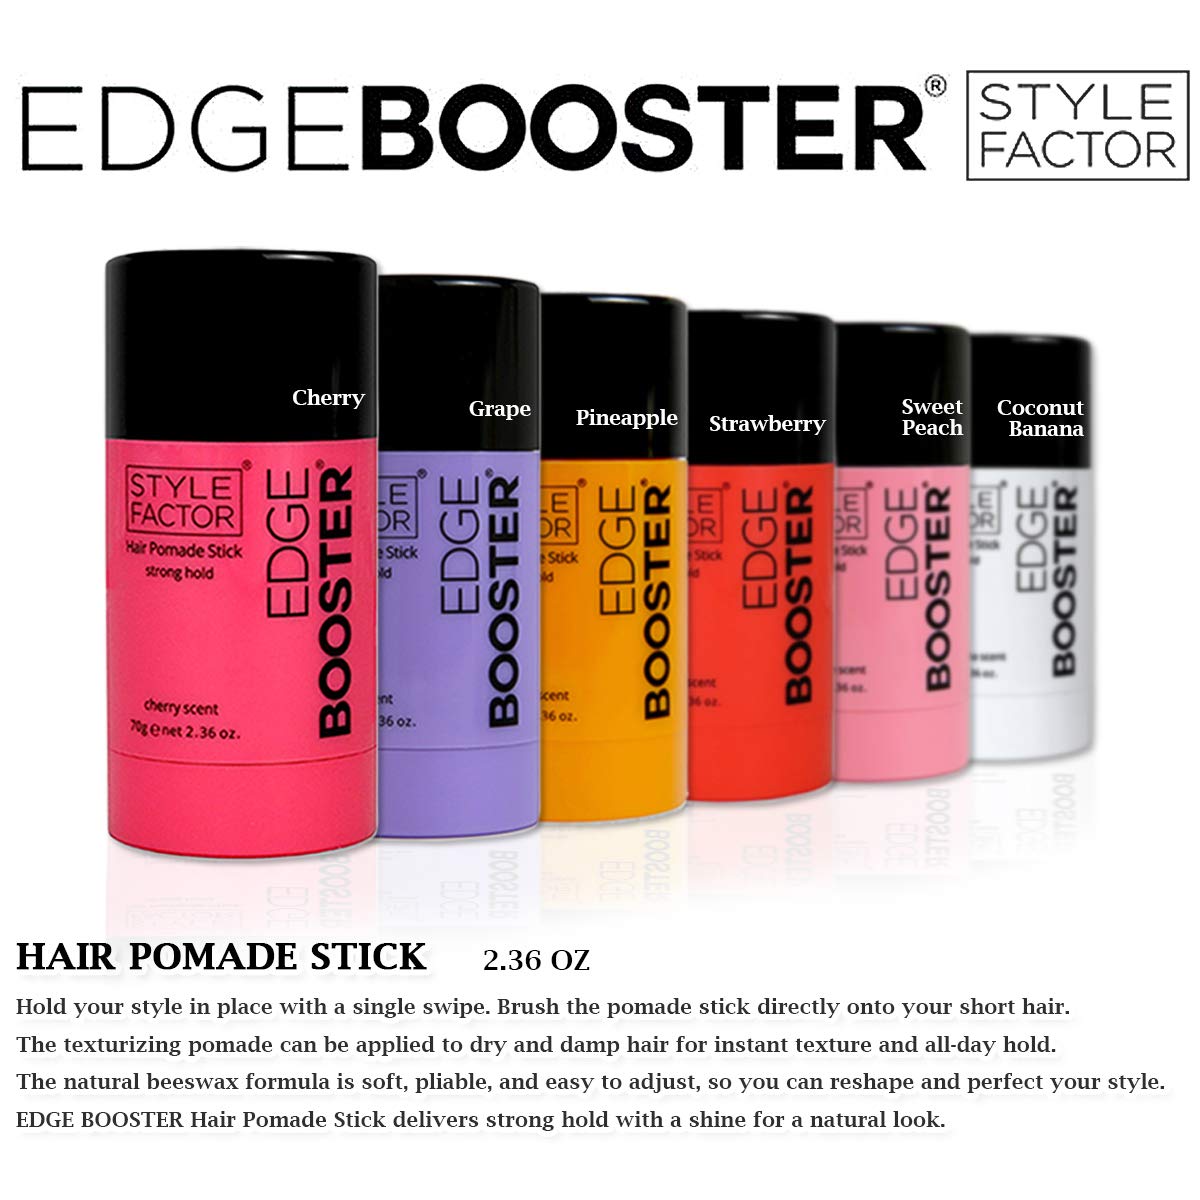 Style Factor Edge Boooster Hair Pomade Stick - 2.36